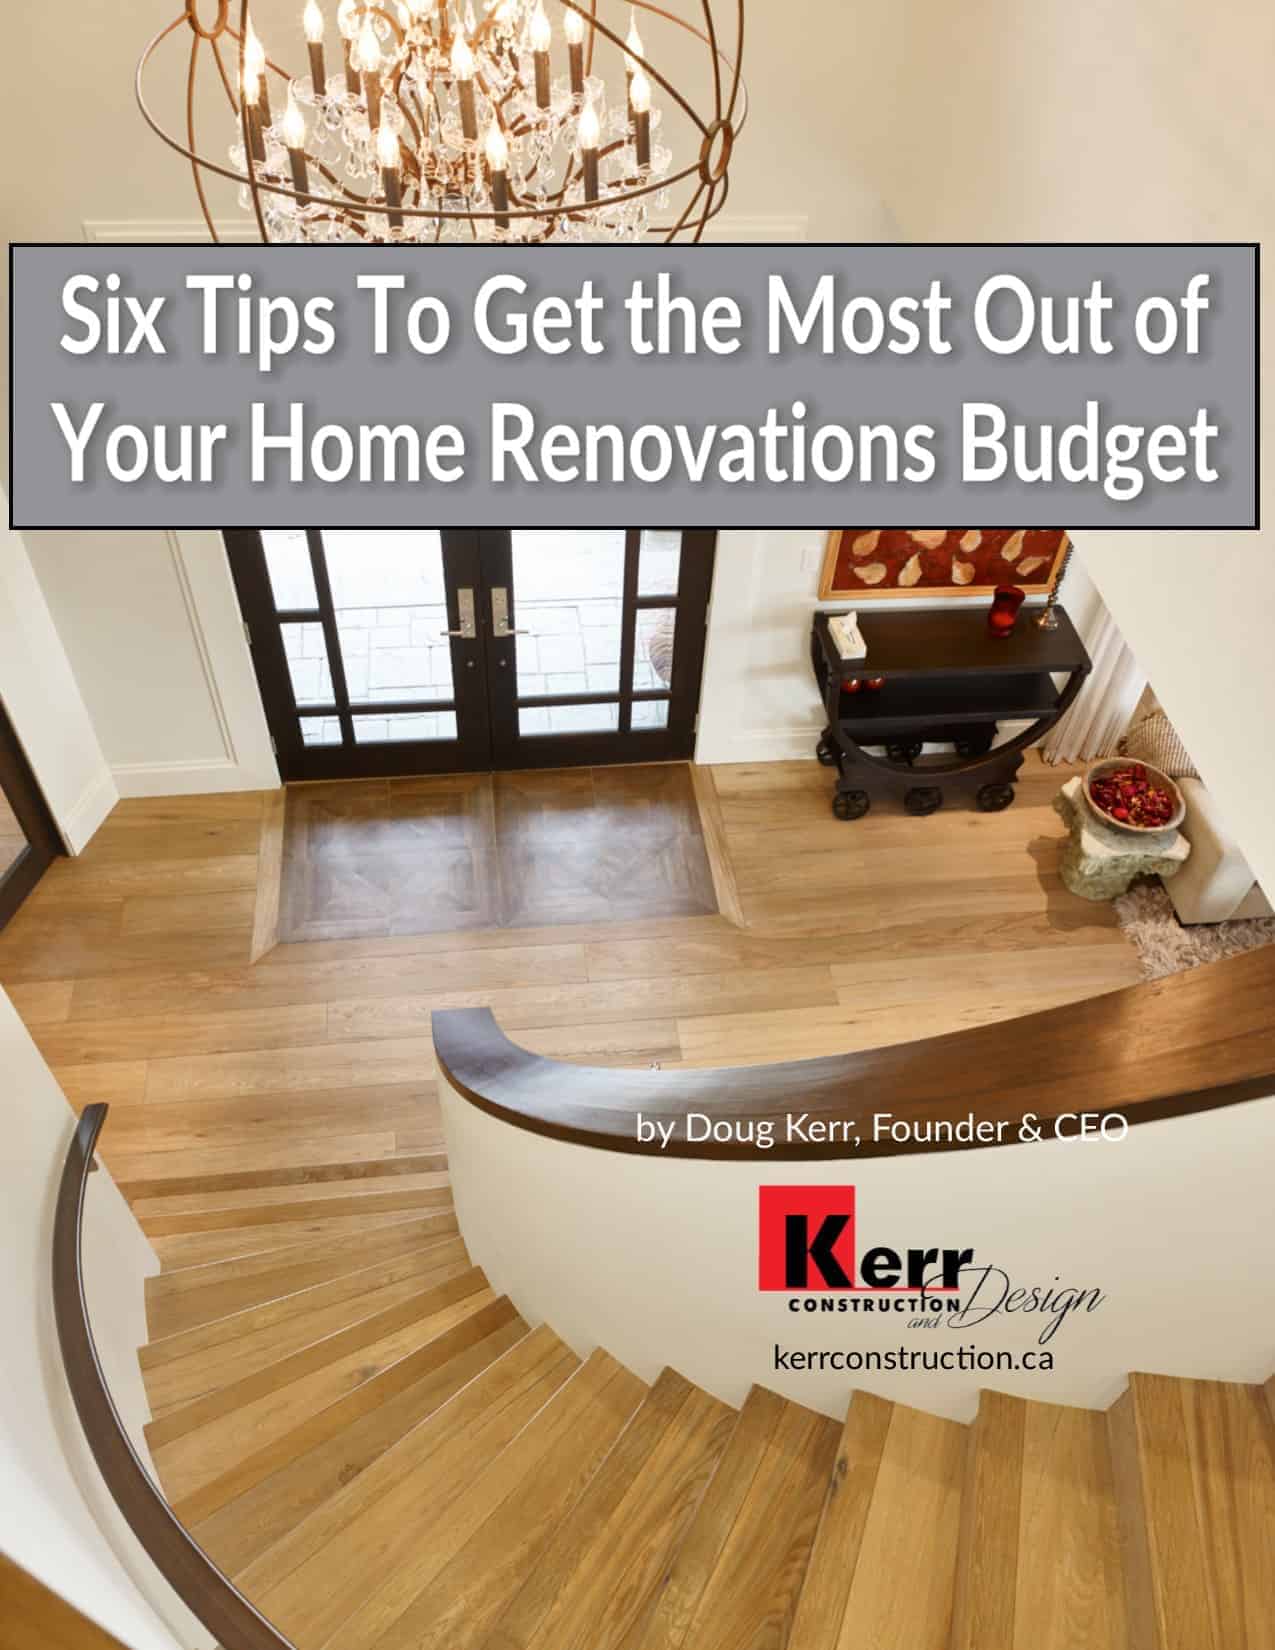 Six Tips to Get the Most Out of Your Home Renovation Budget